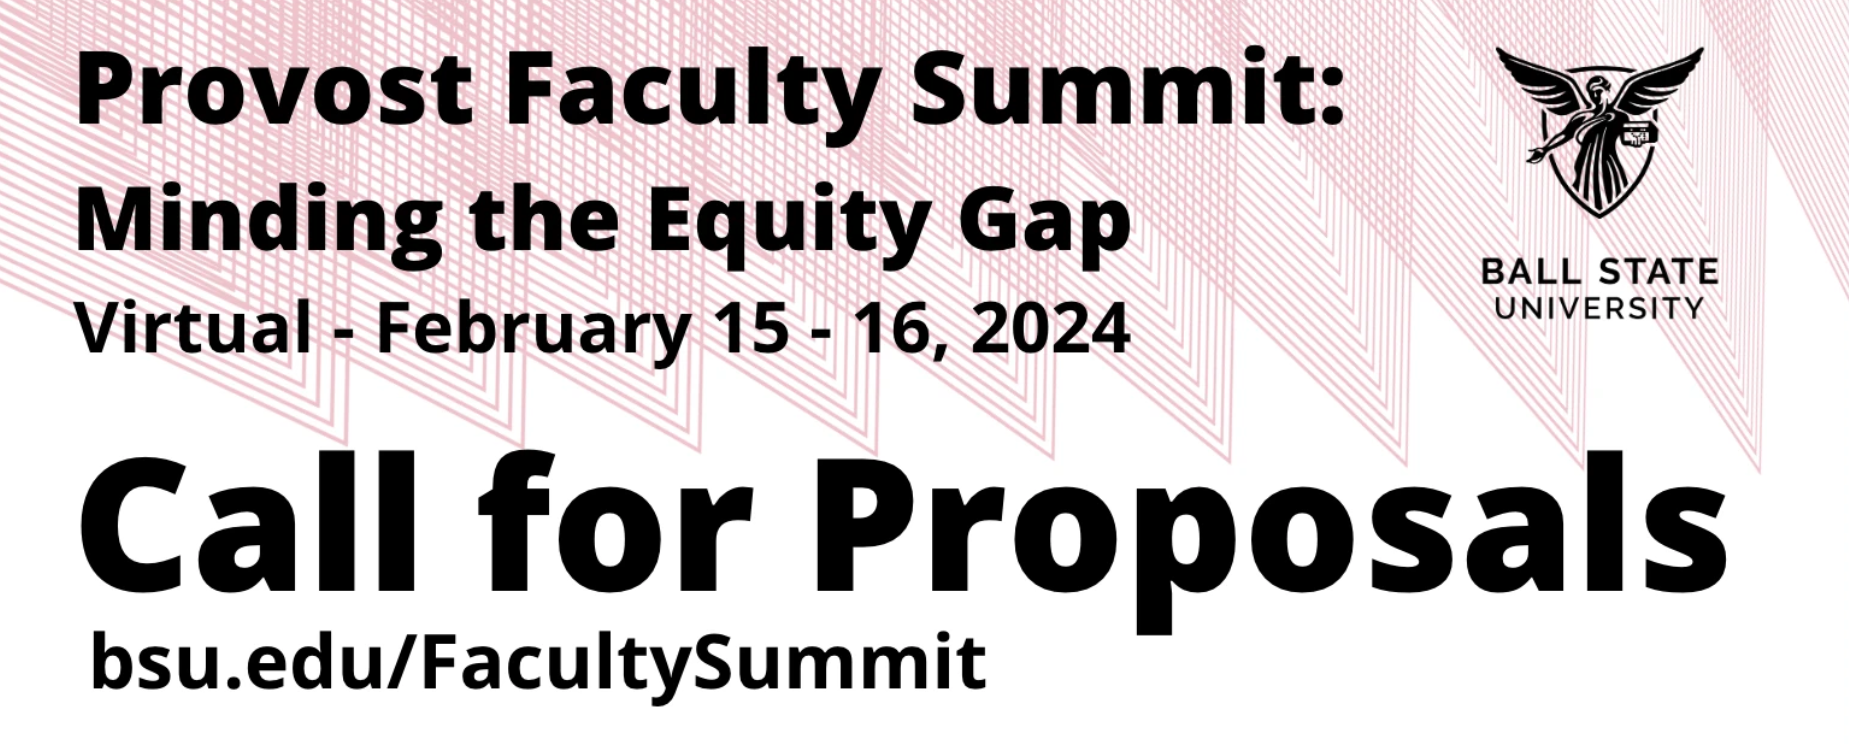 Provost Faculty Summit: Minding the Equity Gap - Virtual - February 15-16, 2024 - Call for Proposals